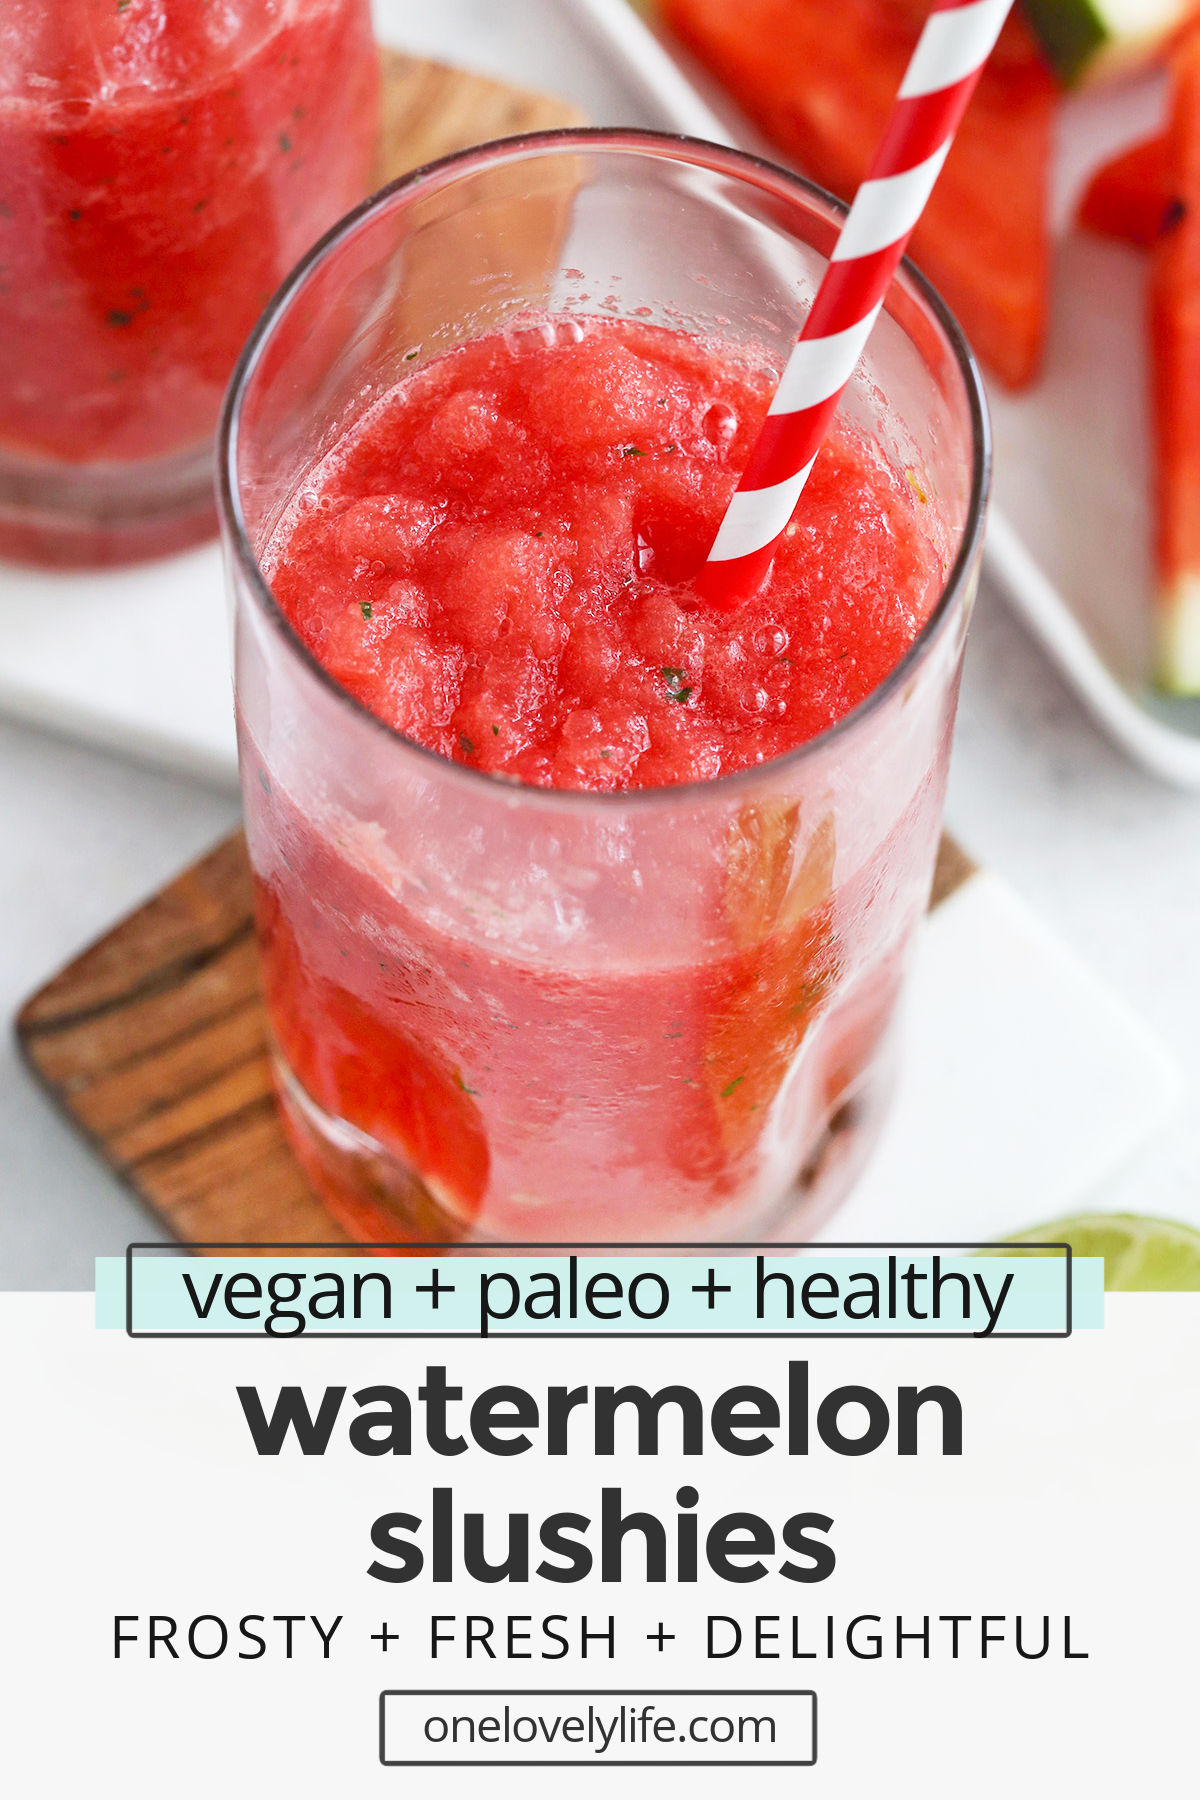 Watermelon Slushie - These frosty watermelon slushies are made from whole-food ingredients and taste AMAZING. So refreshing on a hot day! (Paleo, Vegan) // Watermelon slushy // watermelon icee // watermelon frosty // watermelon drink // watermelon cooler